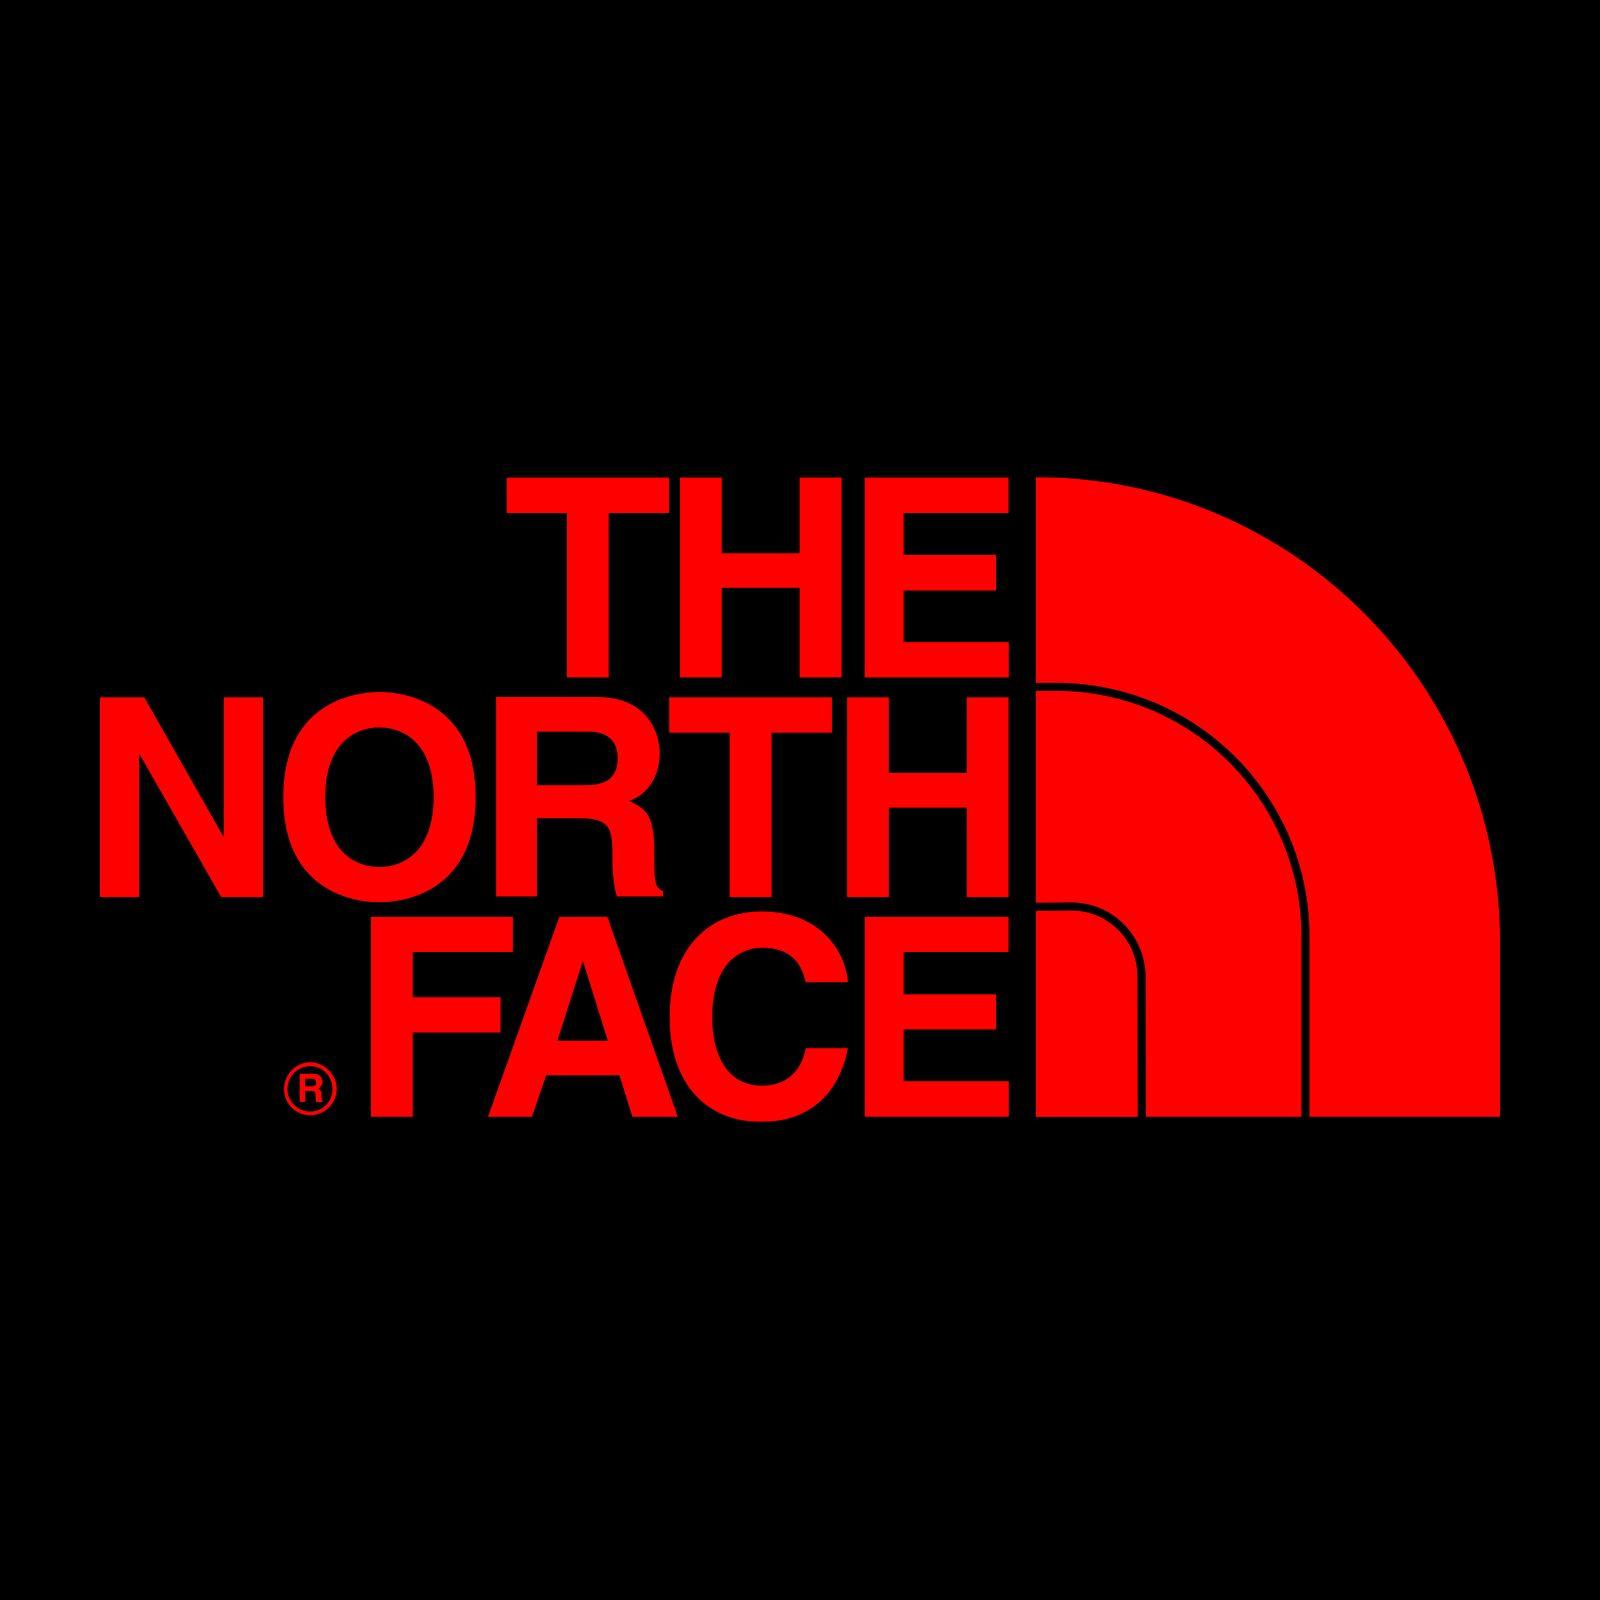 Download wallpapers The North Face red logo 4k red brickwall The North  Face logo brands The North Face neon logo The North Face for desktop  free Pictures for desktop free